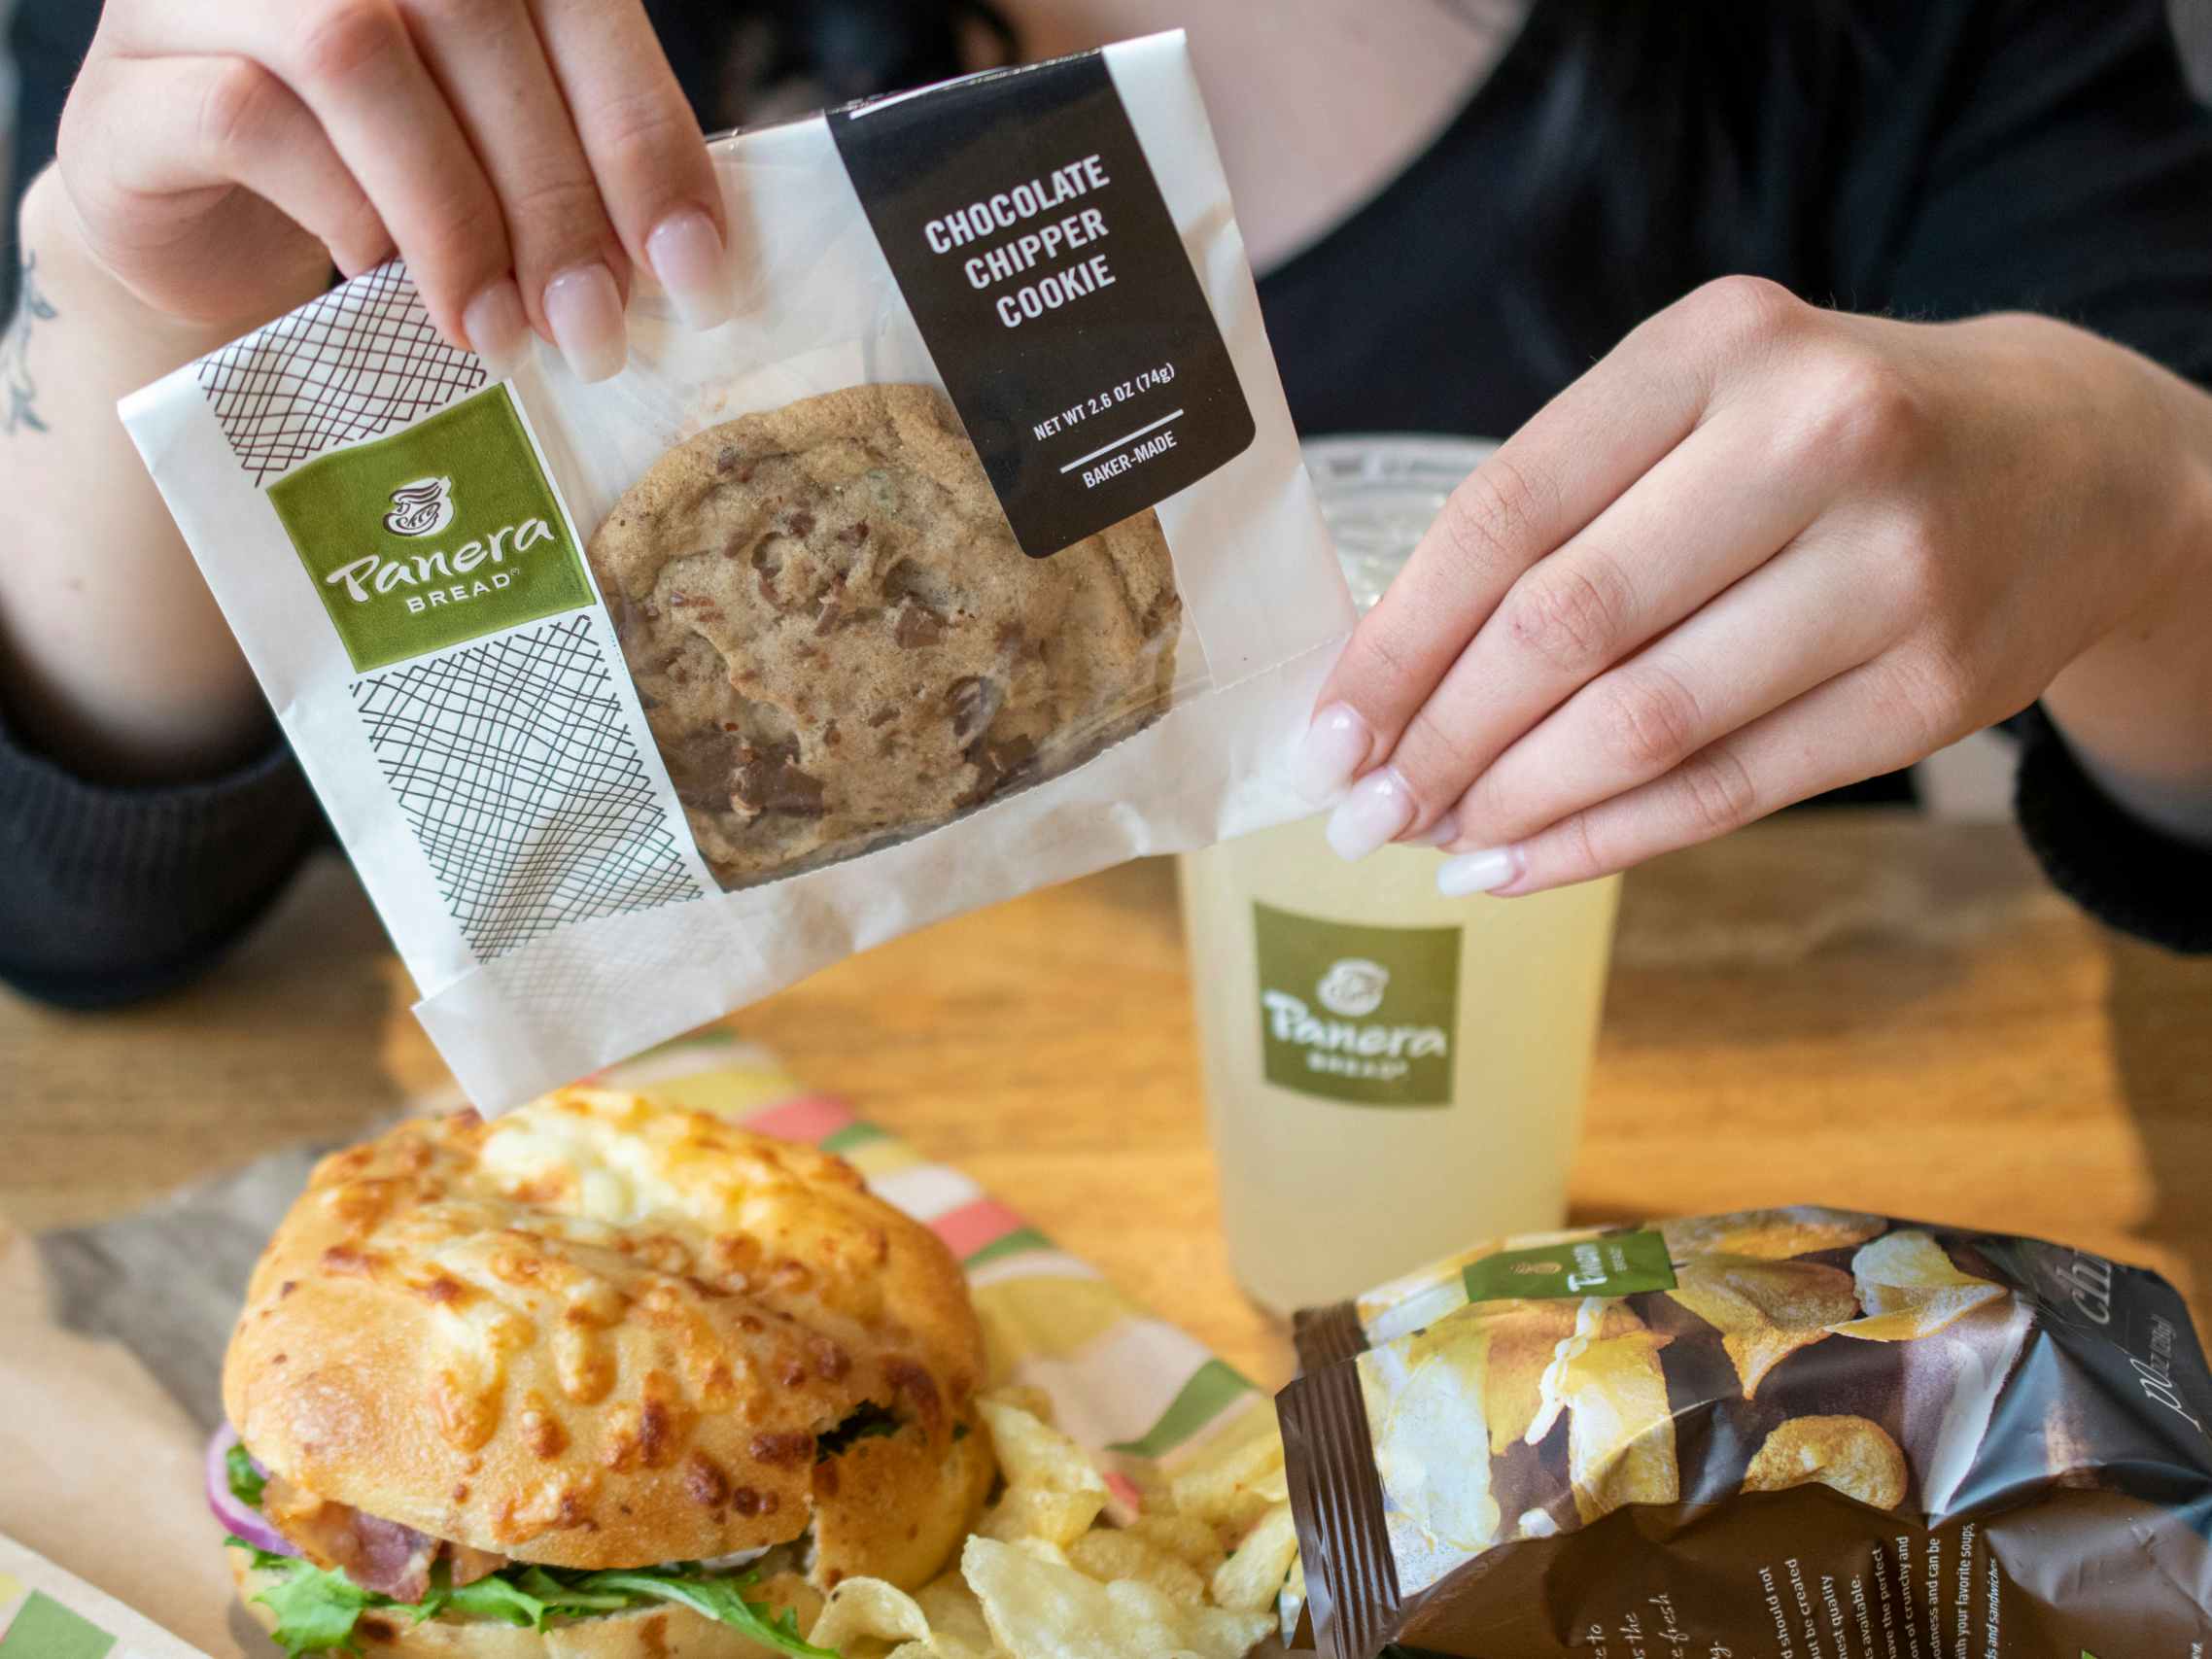 A person holding a Chocolate Chipper cookie next to a Panera meal.